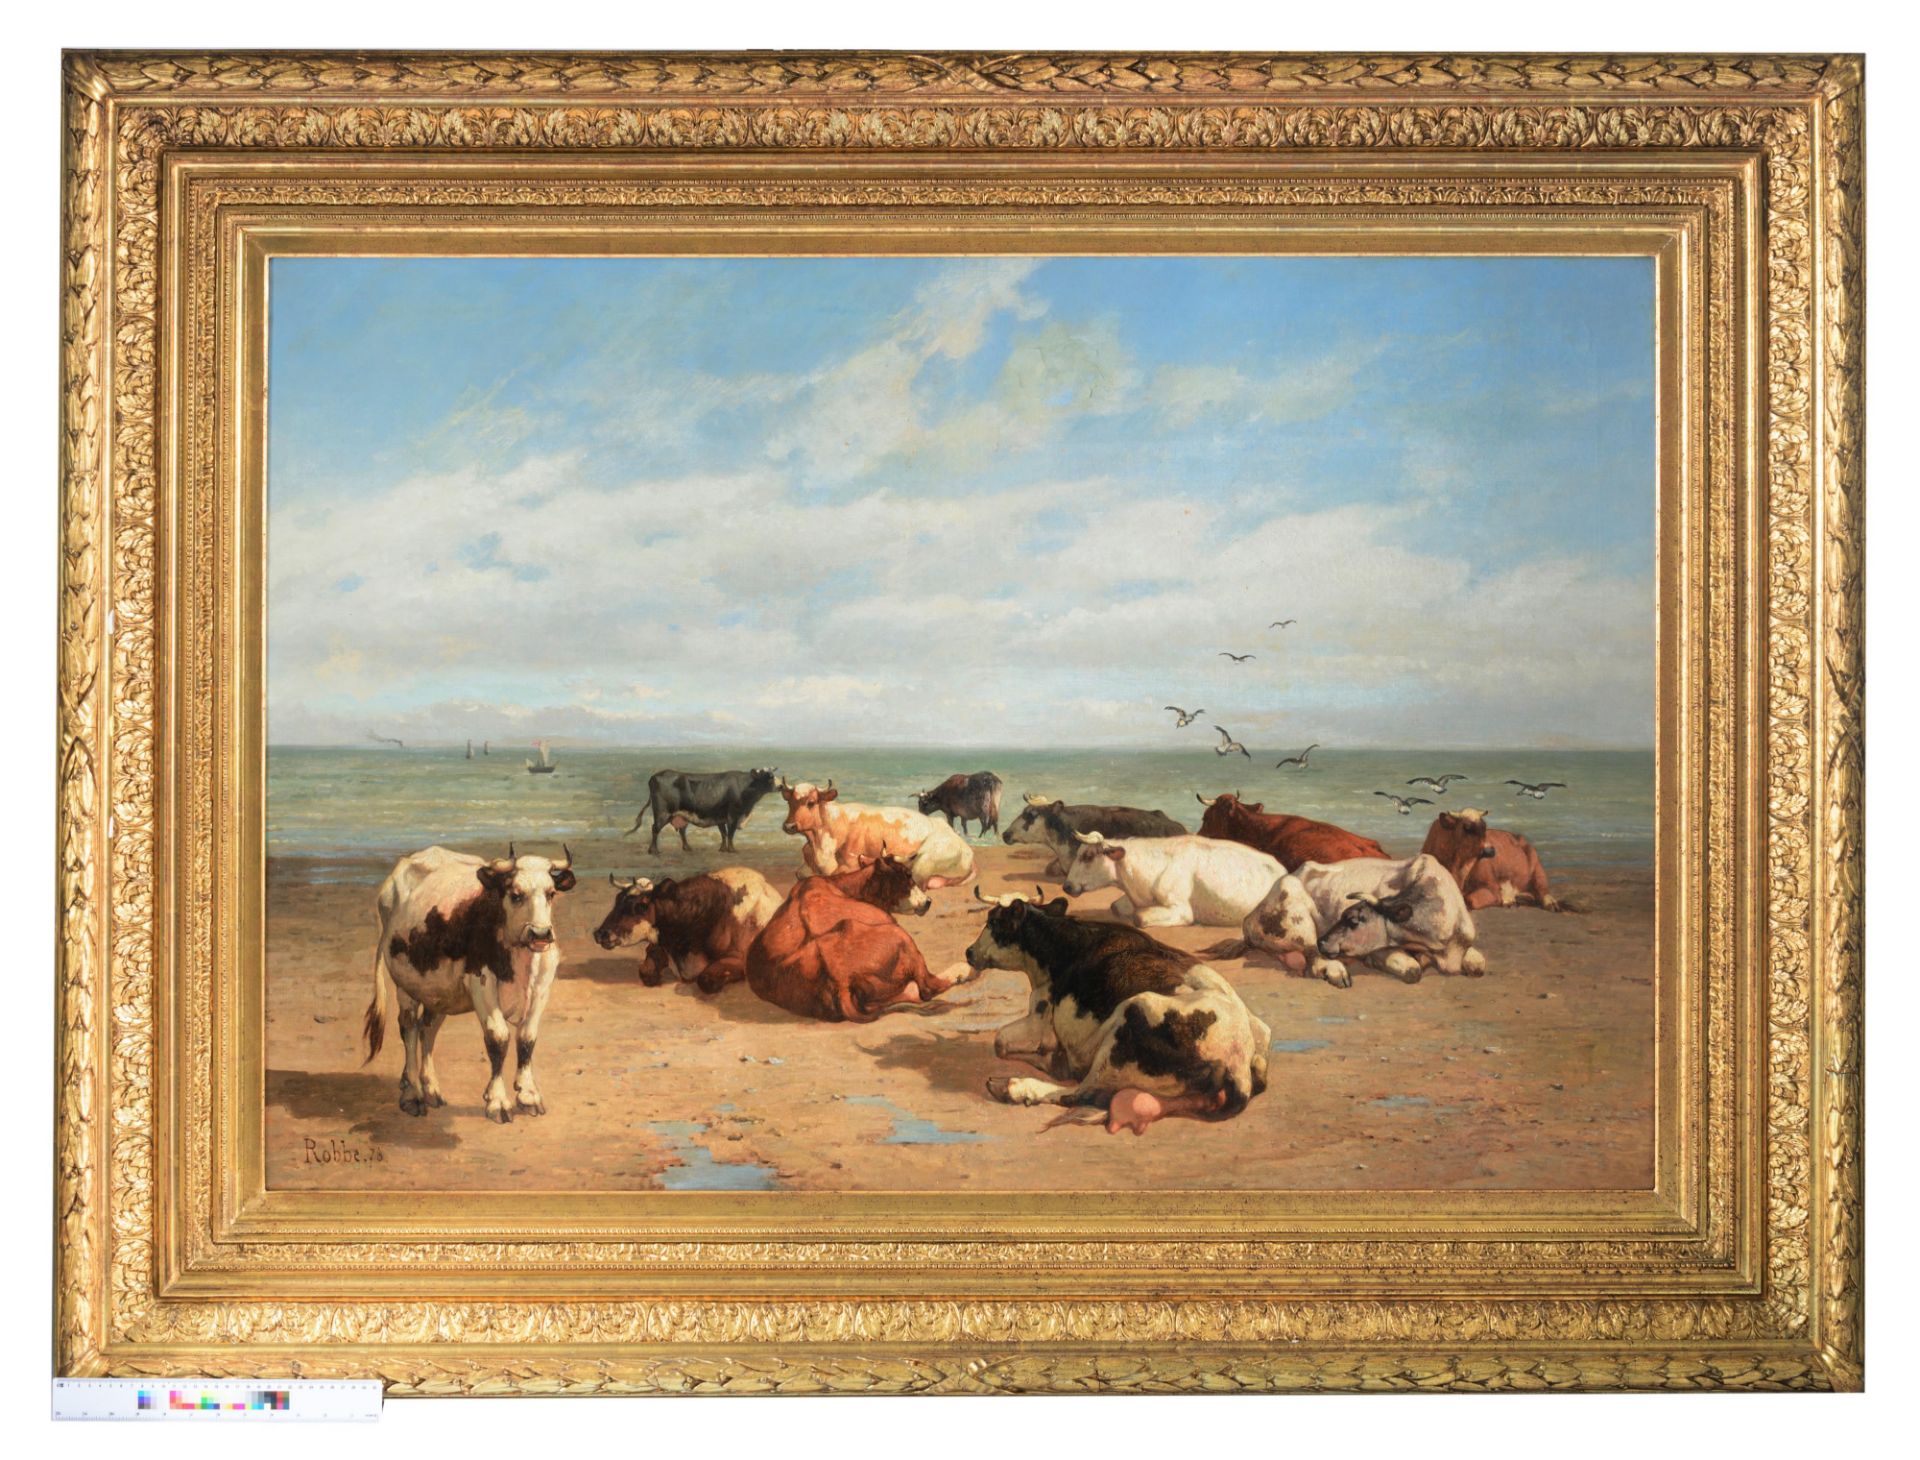 Robbe L. cows resting at the beach, dated (18)78, oil on canvas, 93 x 135 cm - Bild 9 aus 9